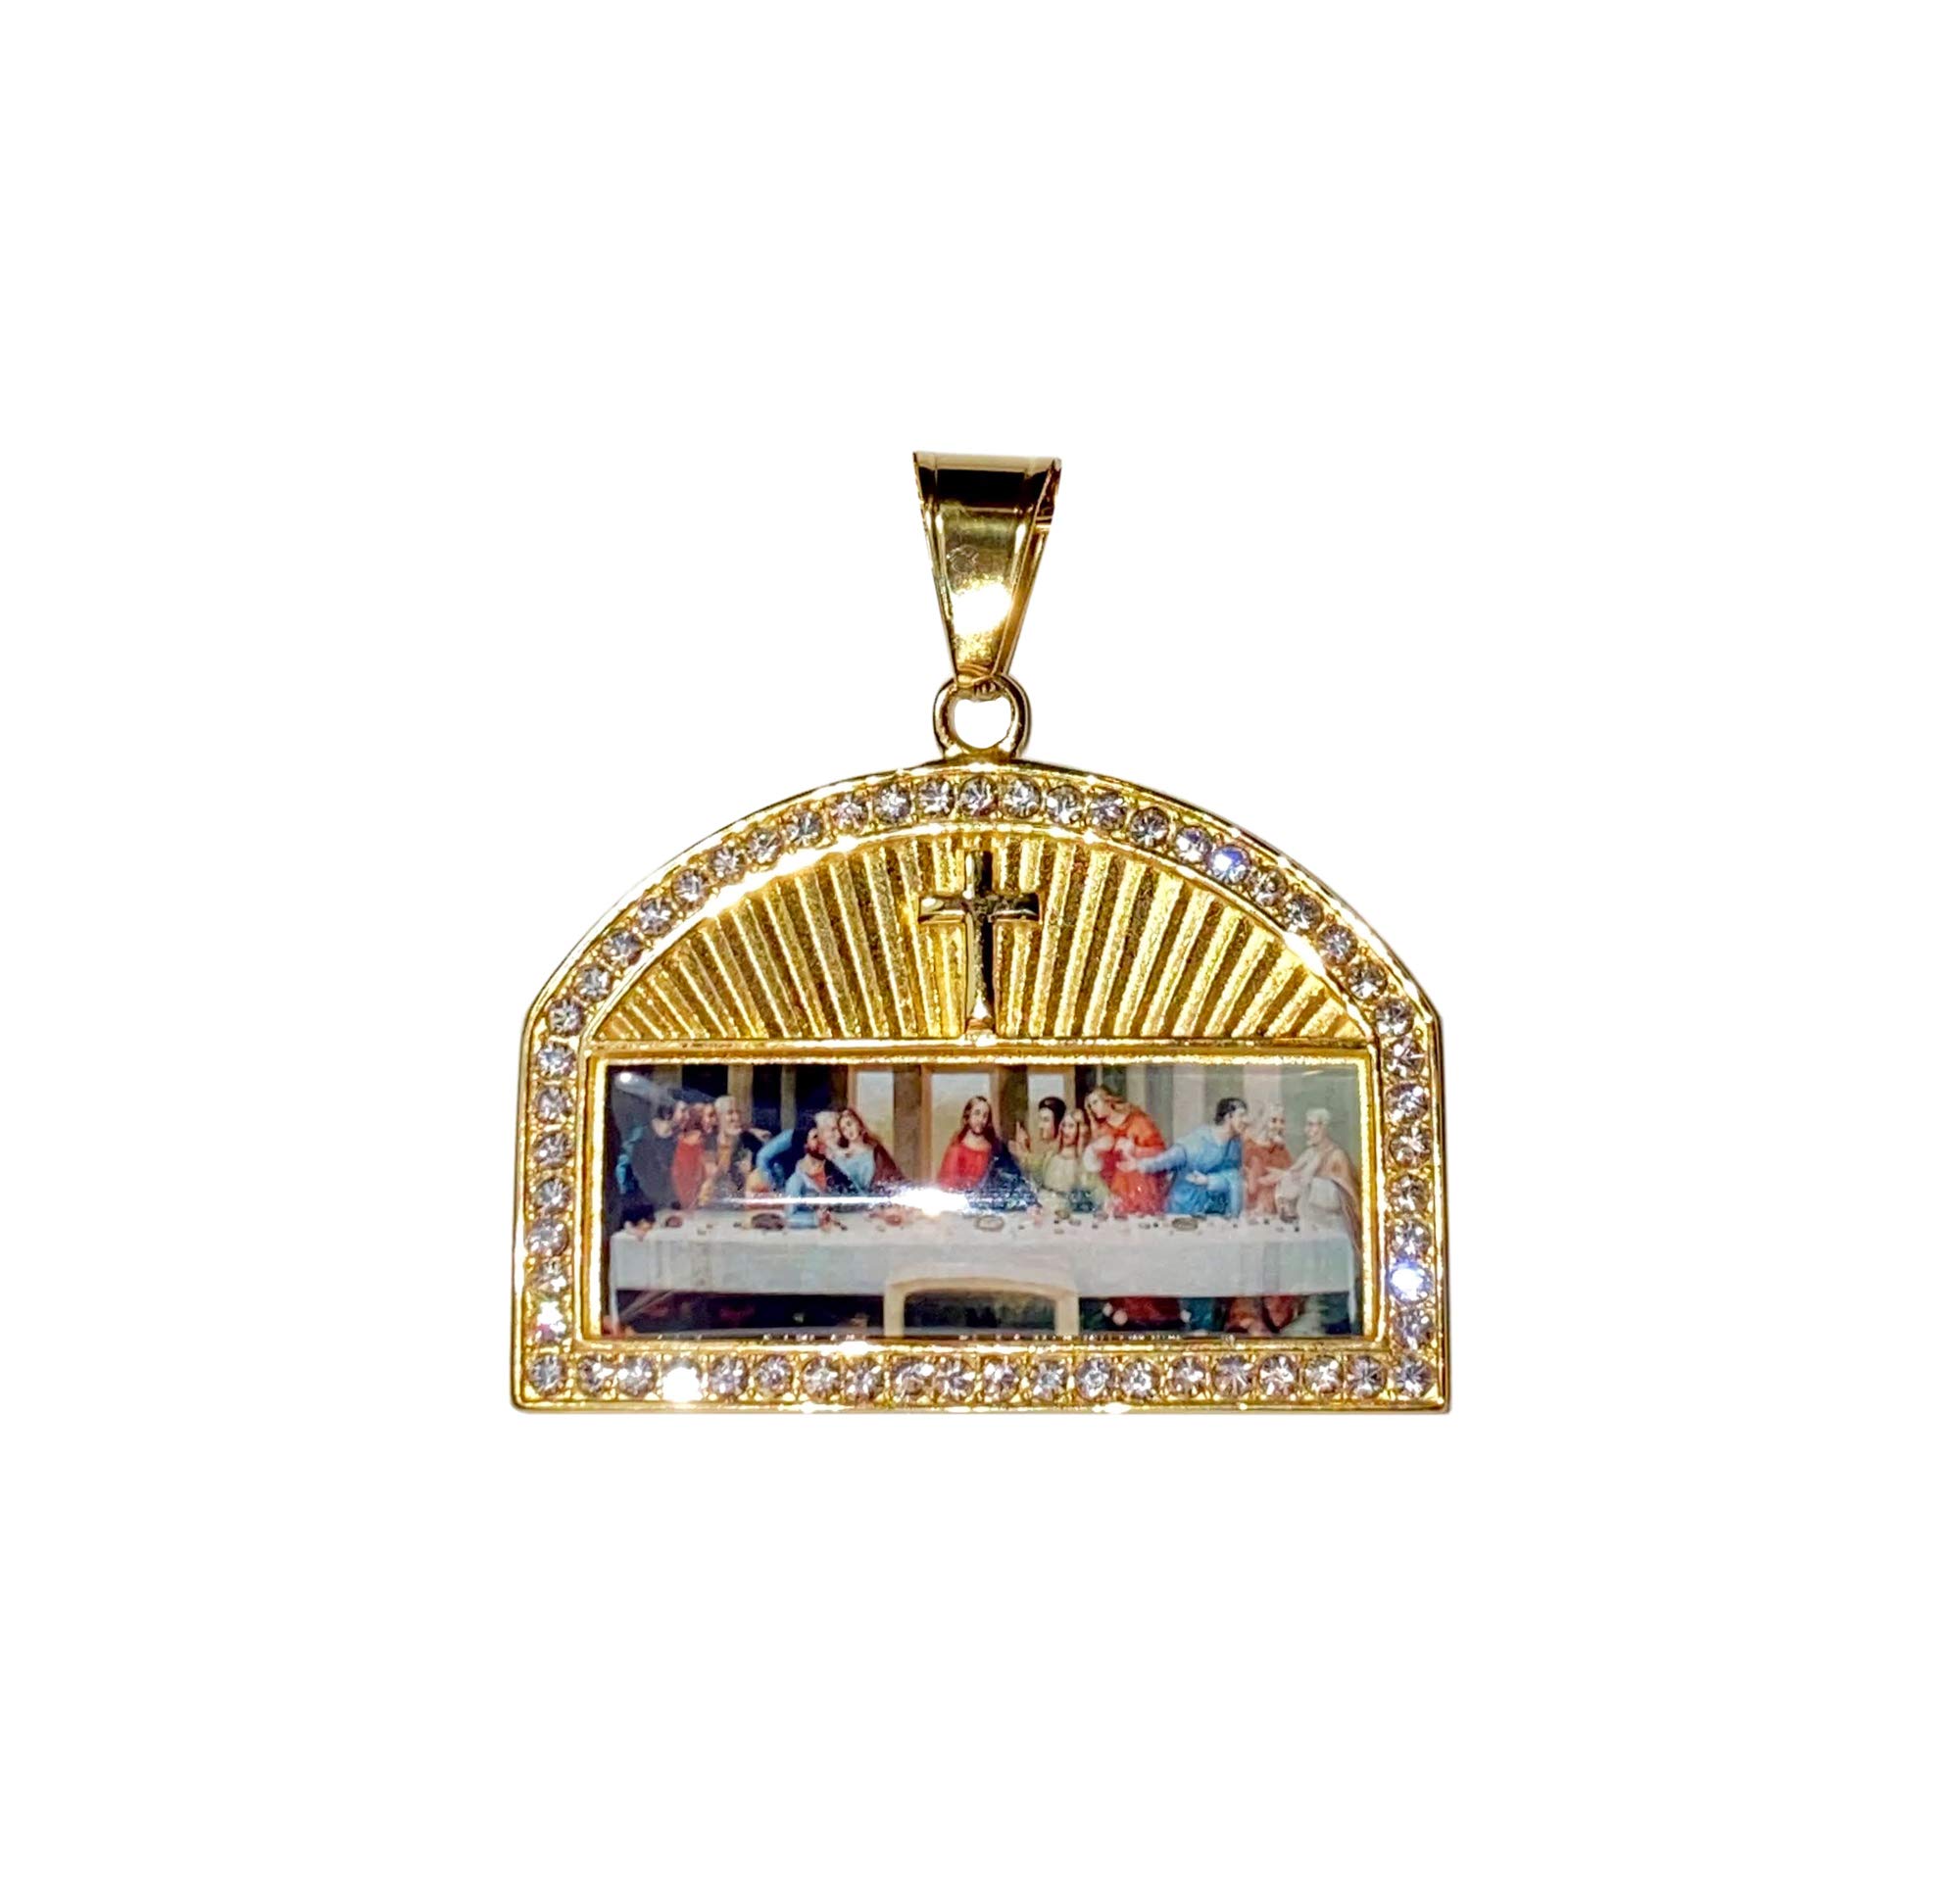 Men Women 925 Italy 14k Gold Finish Iced Big Last Supper of Jesus with His Disciples Pendant Necklace Necklace Punk Retro Vintage Style Bull Head Pendant Stainless Steel Real 2.5 mm Rope Chain Necklace, Men's Jewelry, Family Dinner Chain Pendant Rope Neck